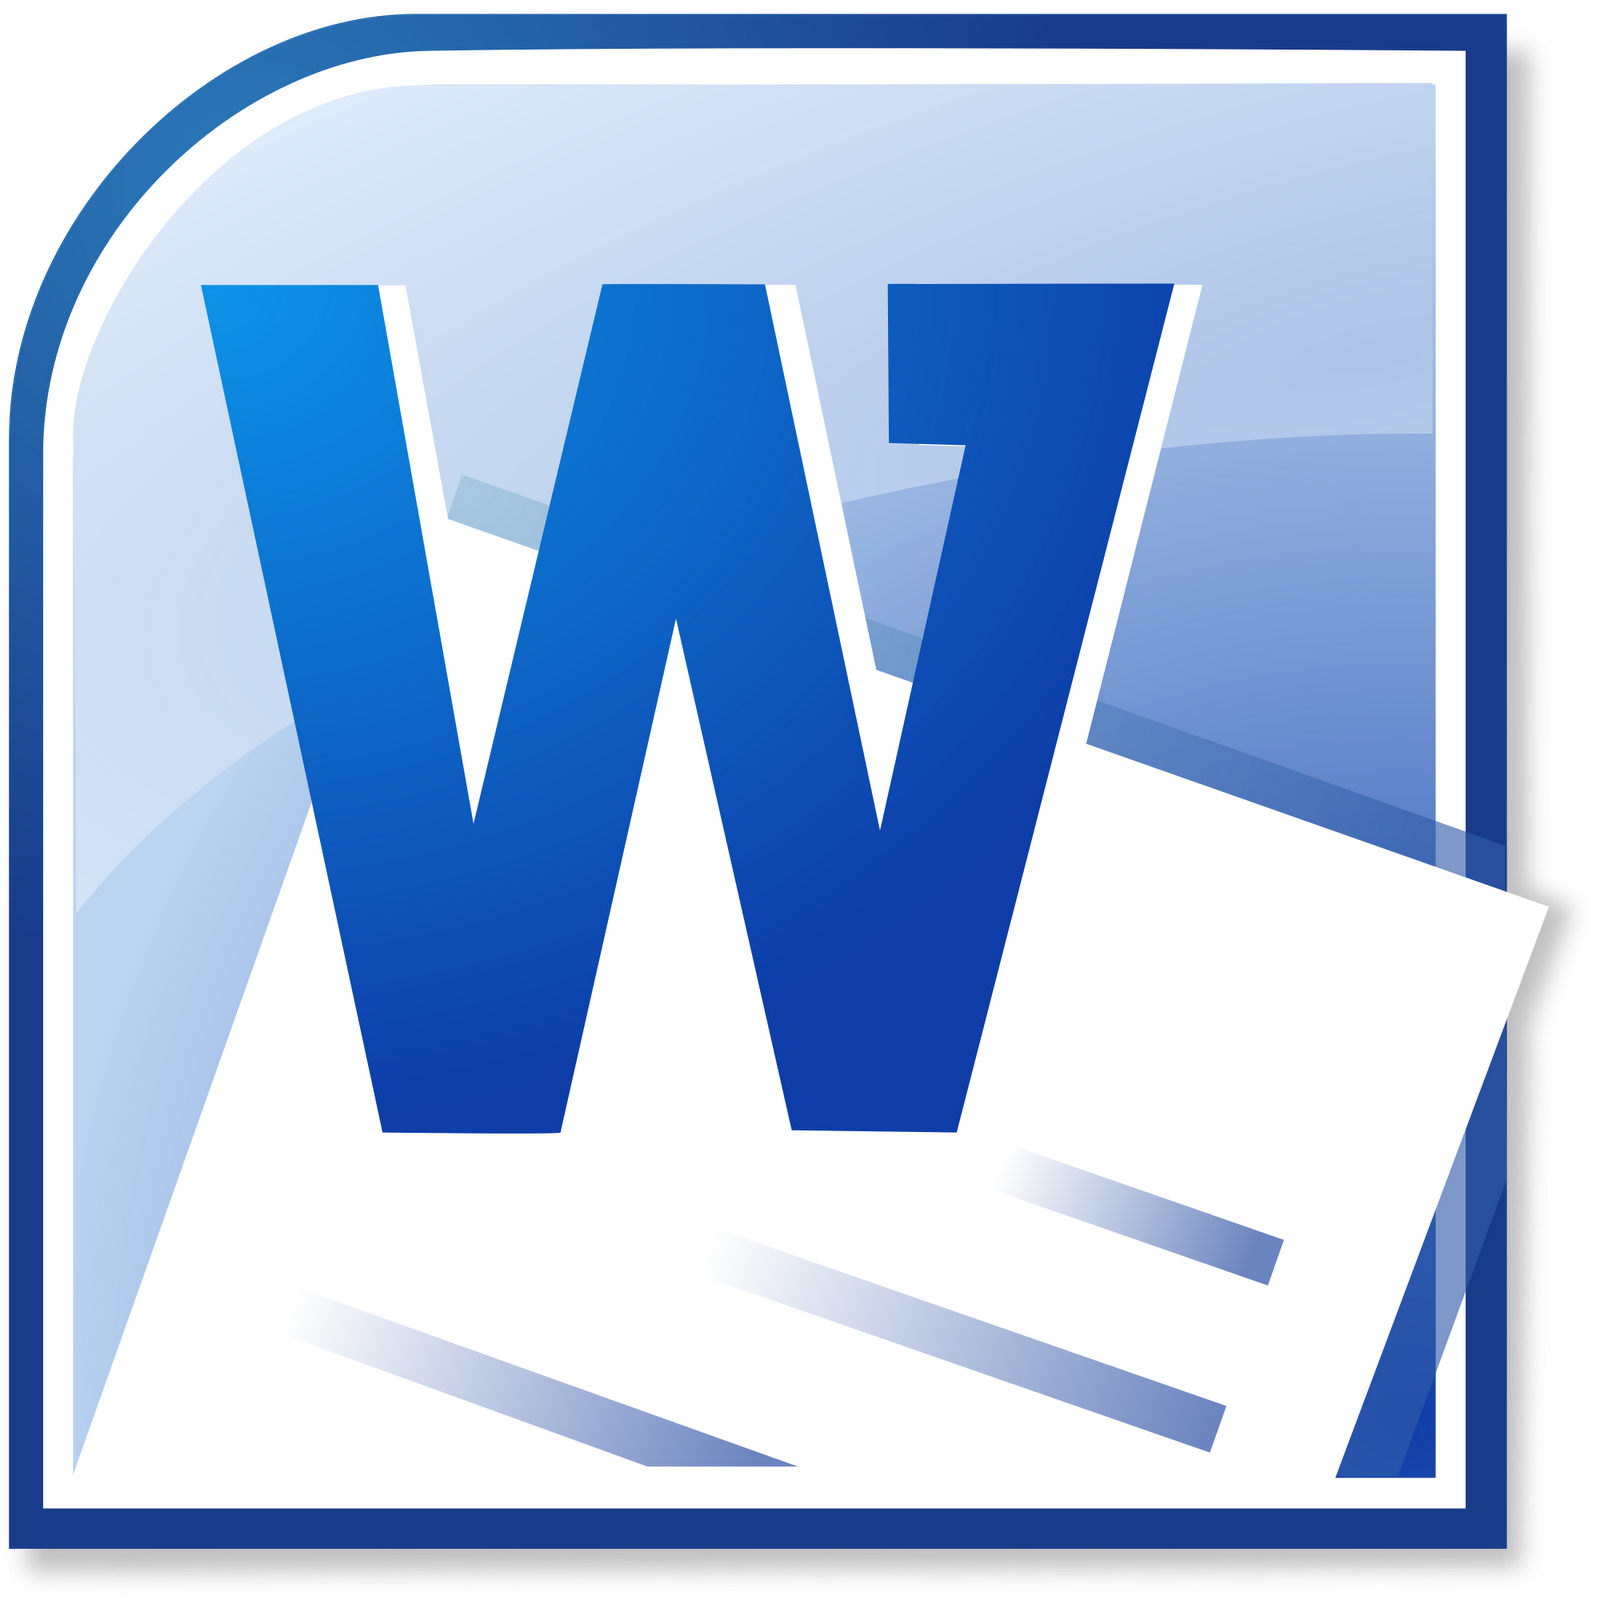 Add-on for Microsoft Word now available - BibleGet I/O